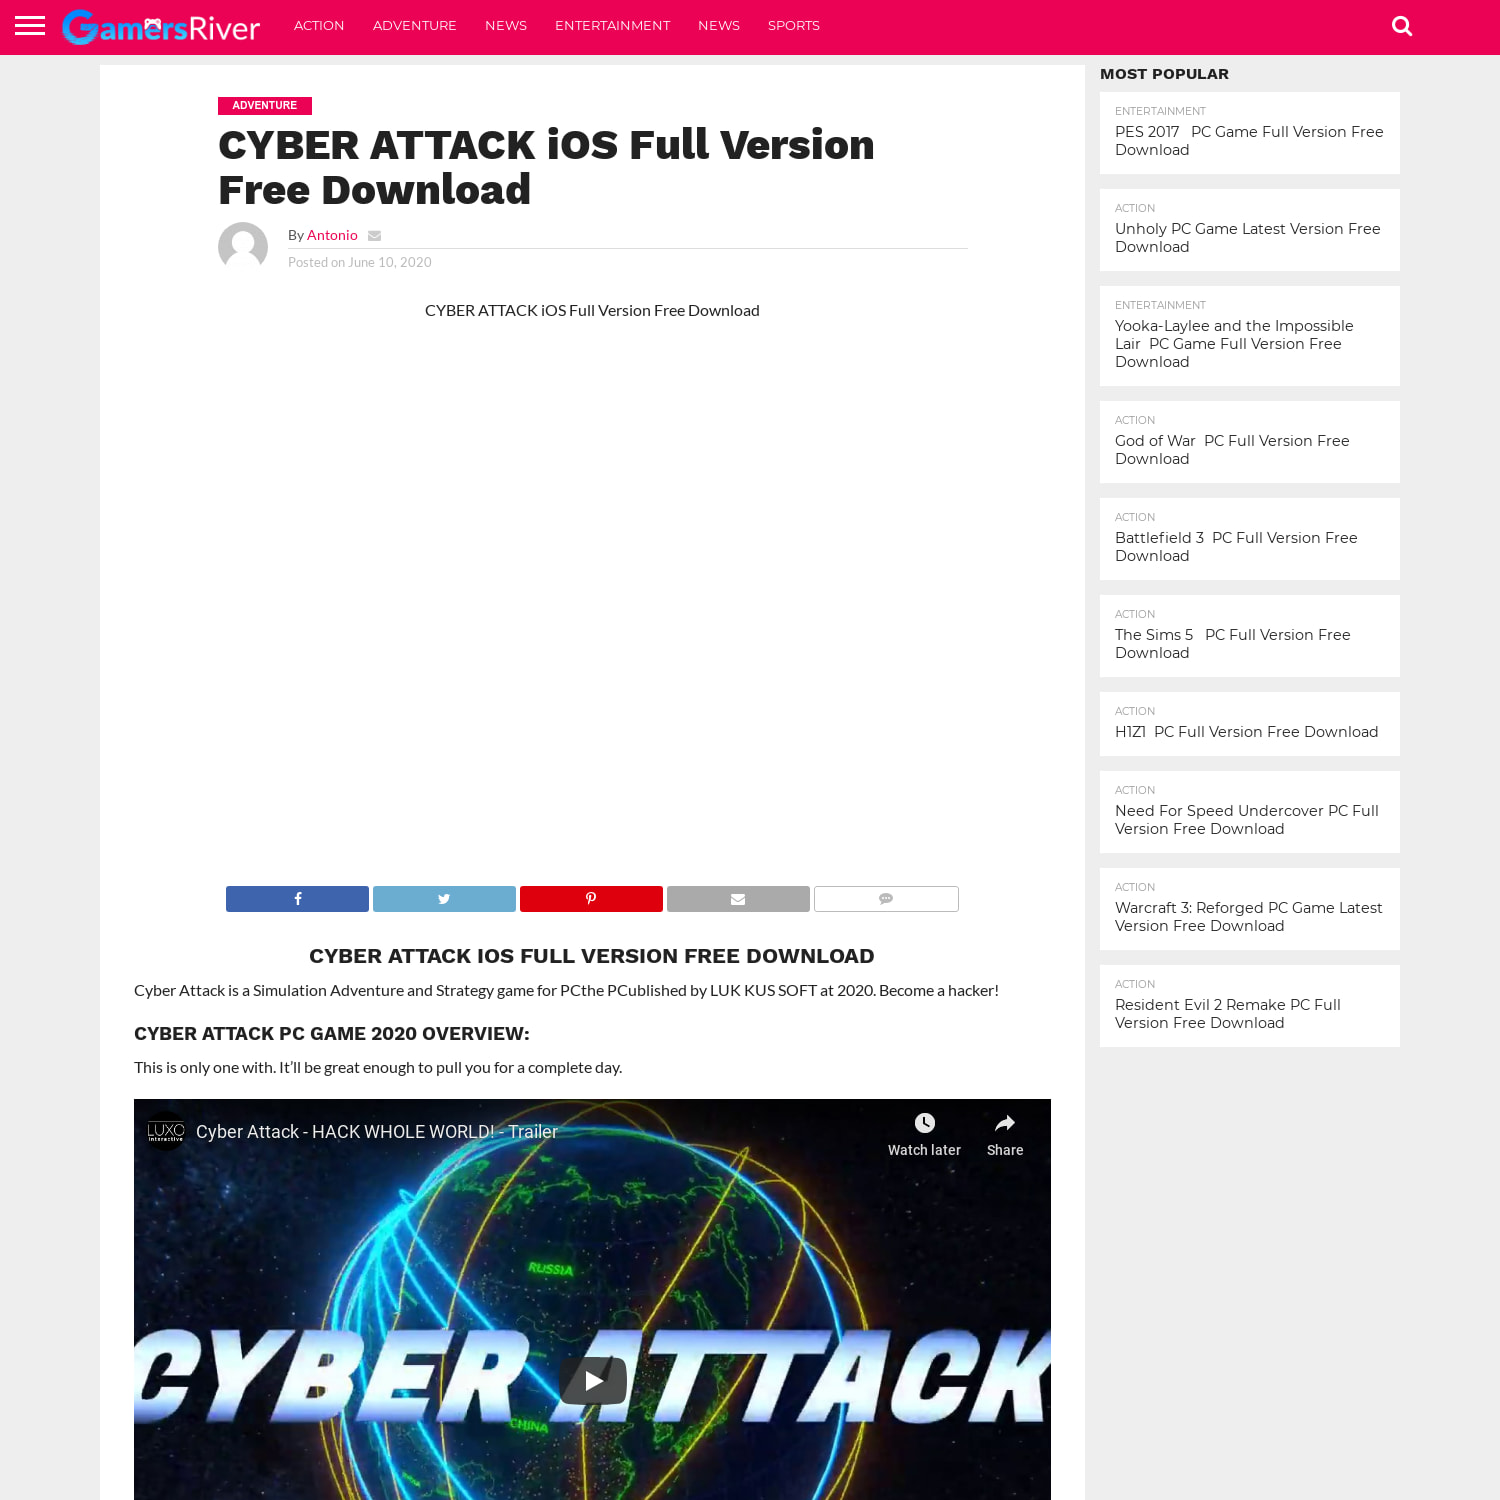 CYBER ATTACK iOS Full Version Free Download